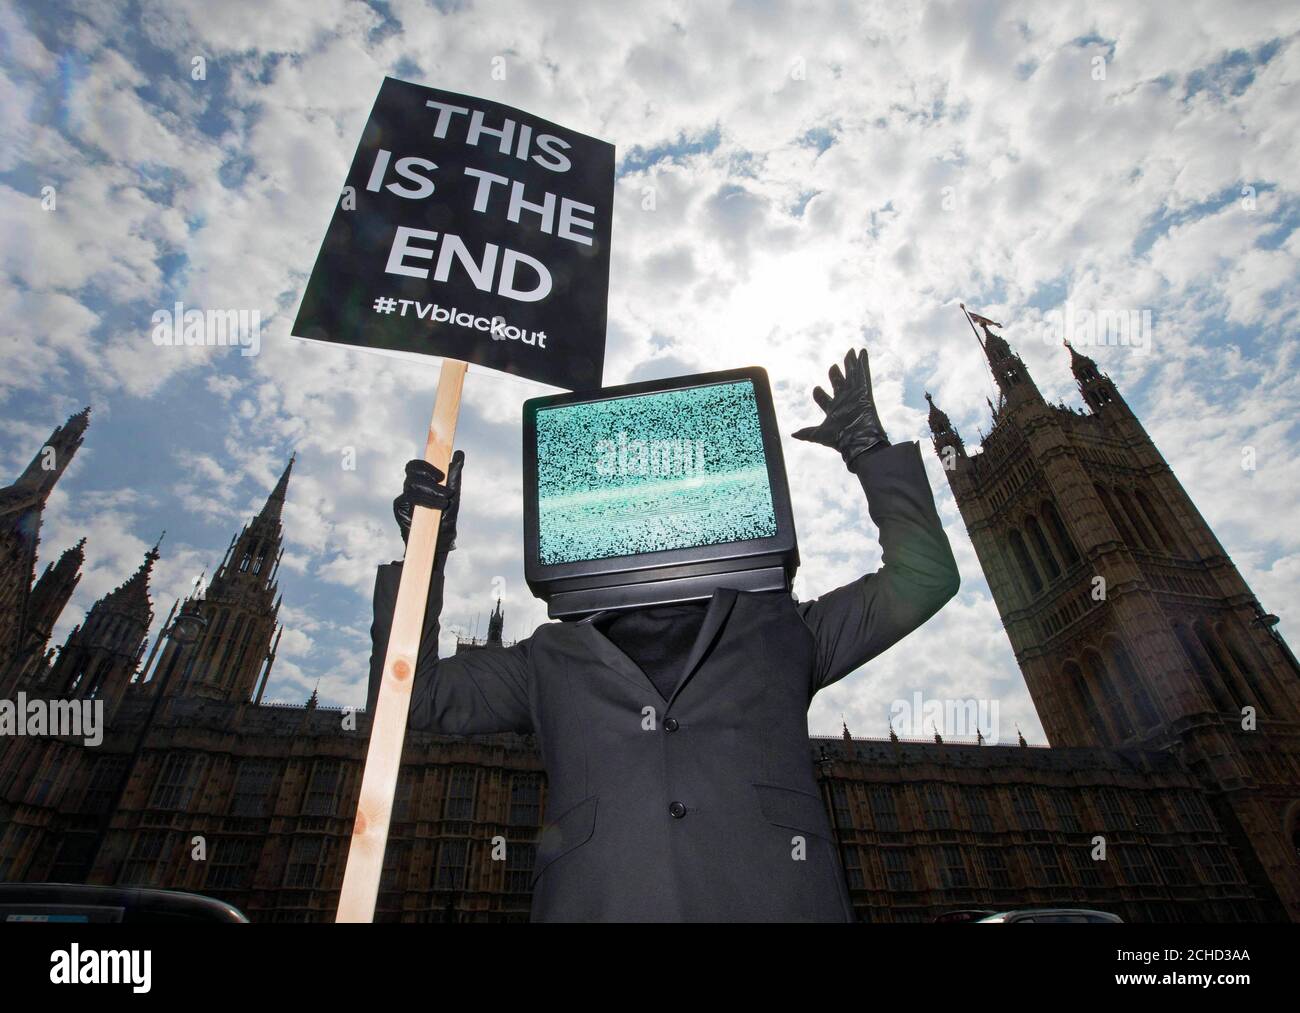 EDITORIAL USE ONLY A person with a TV head holds a 'This is the End' protest sign in Westminster, London, as part of a campaign by Samsung to launch their new QLED TV range.  Stock Photo